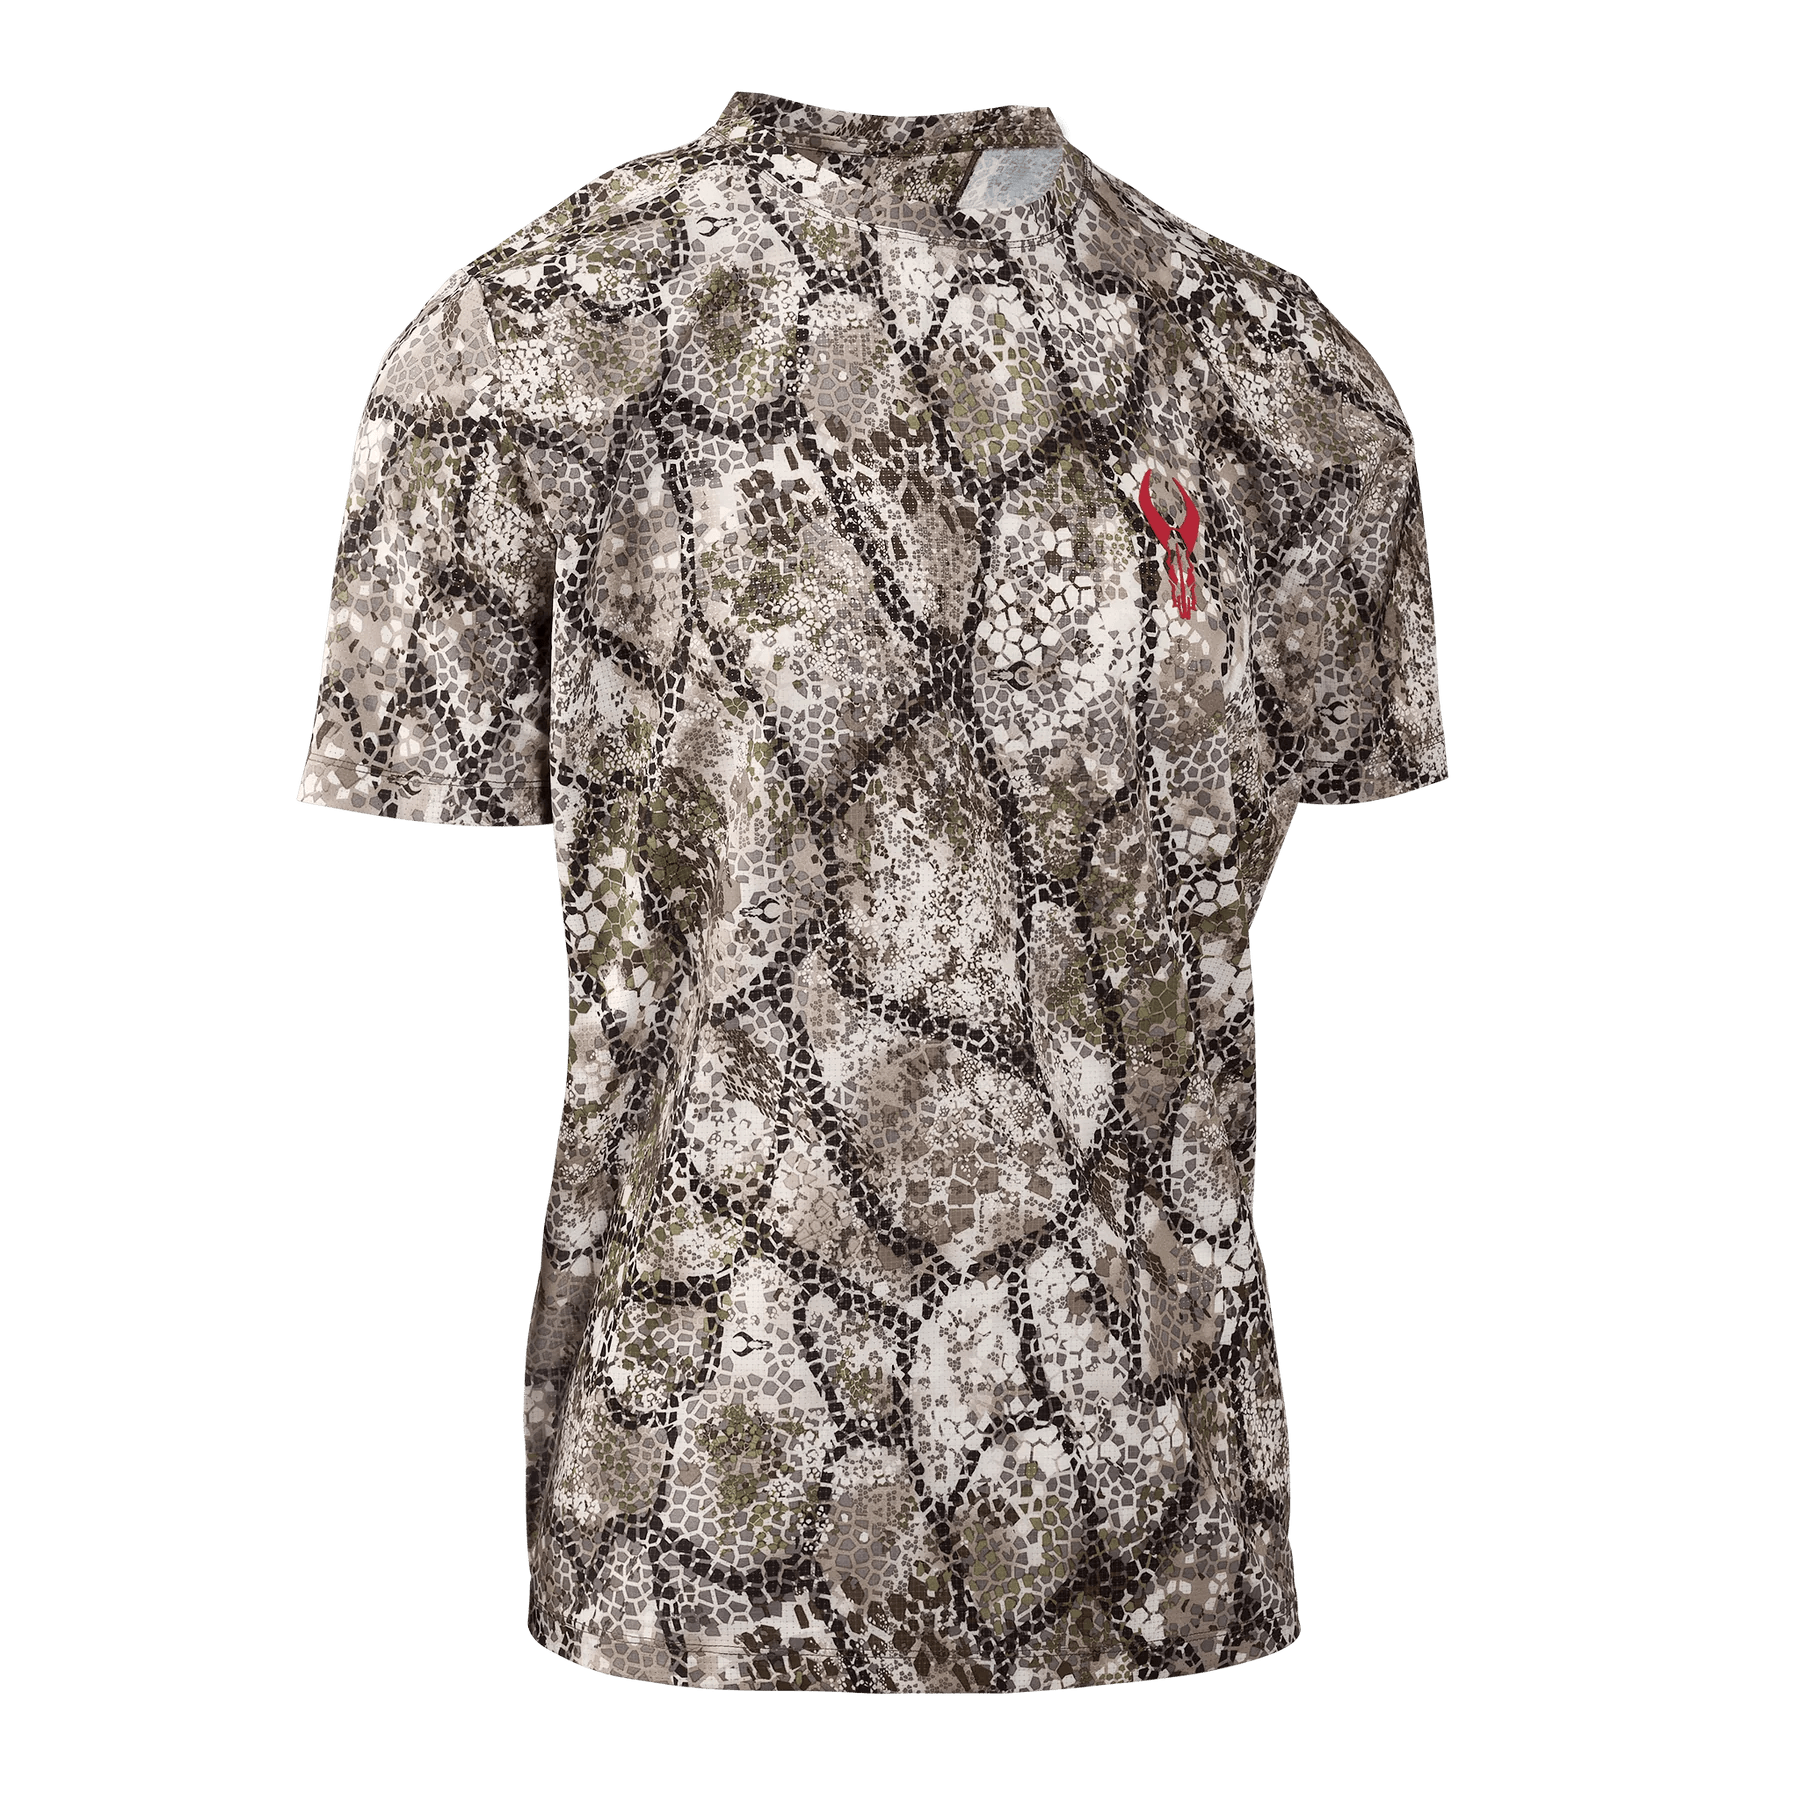 Badlands Andaire Short Sleeve - Leapfrog Outdoor Sports and Apparel